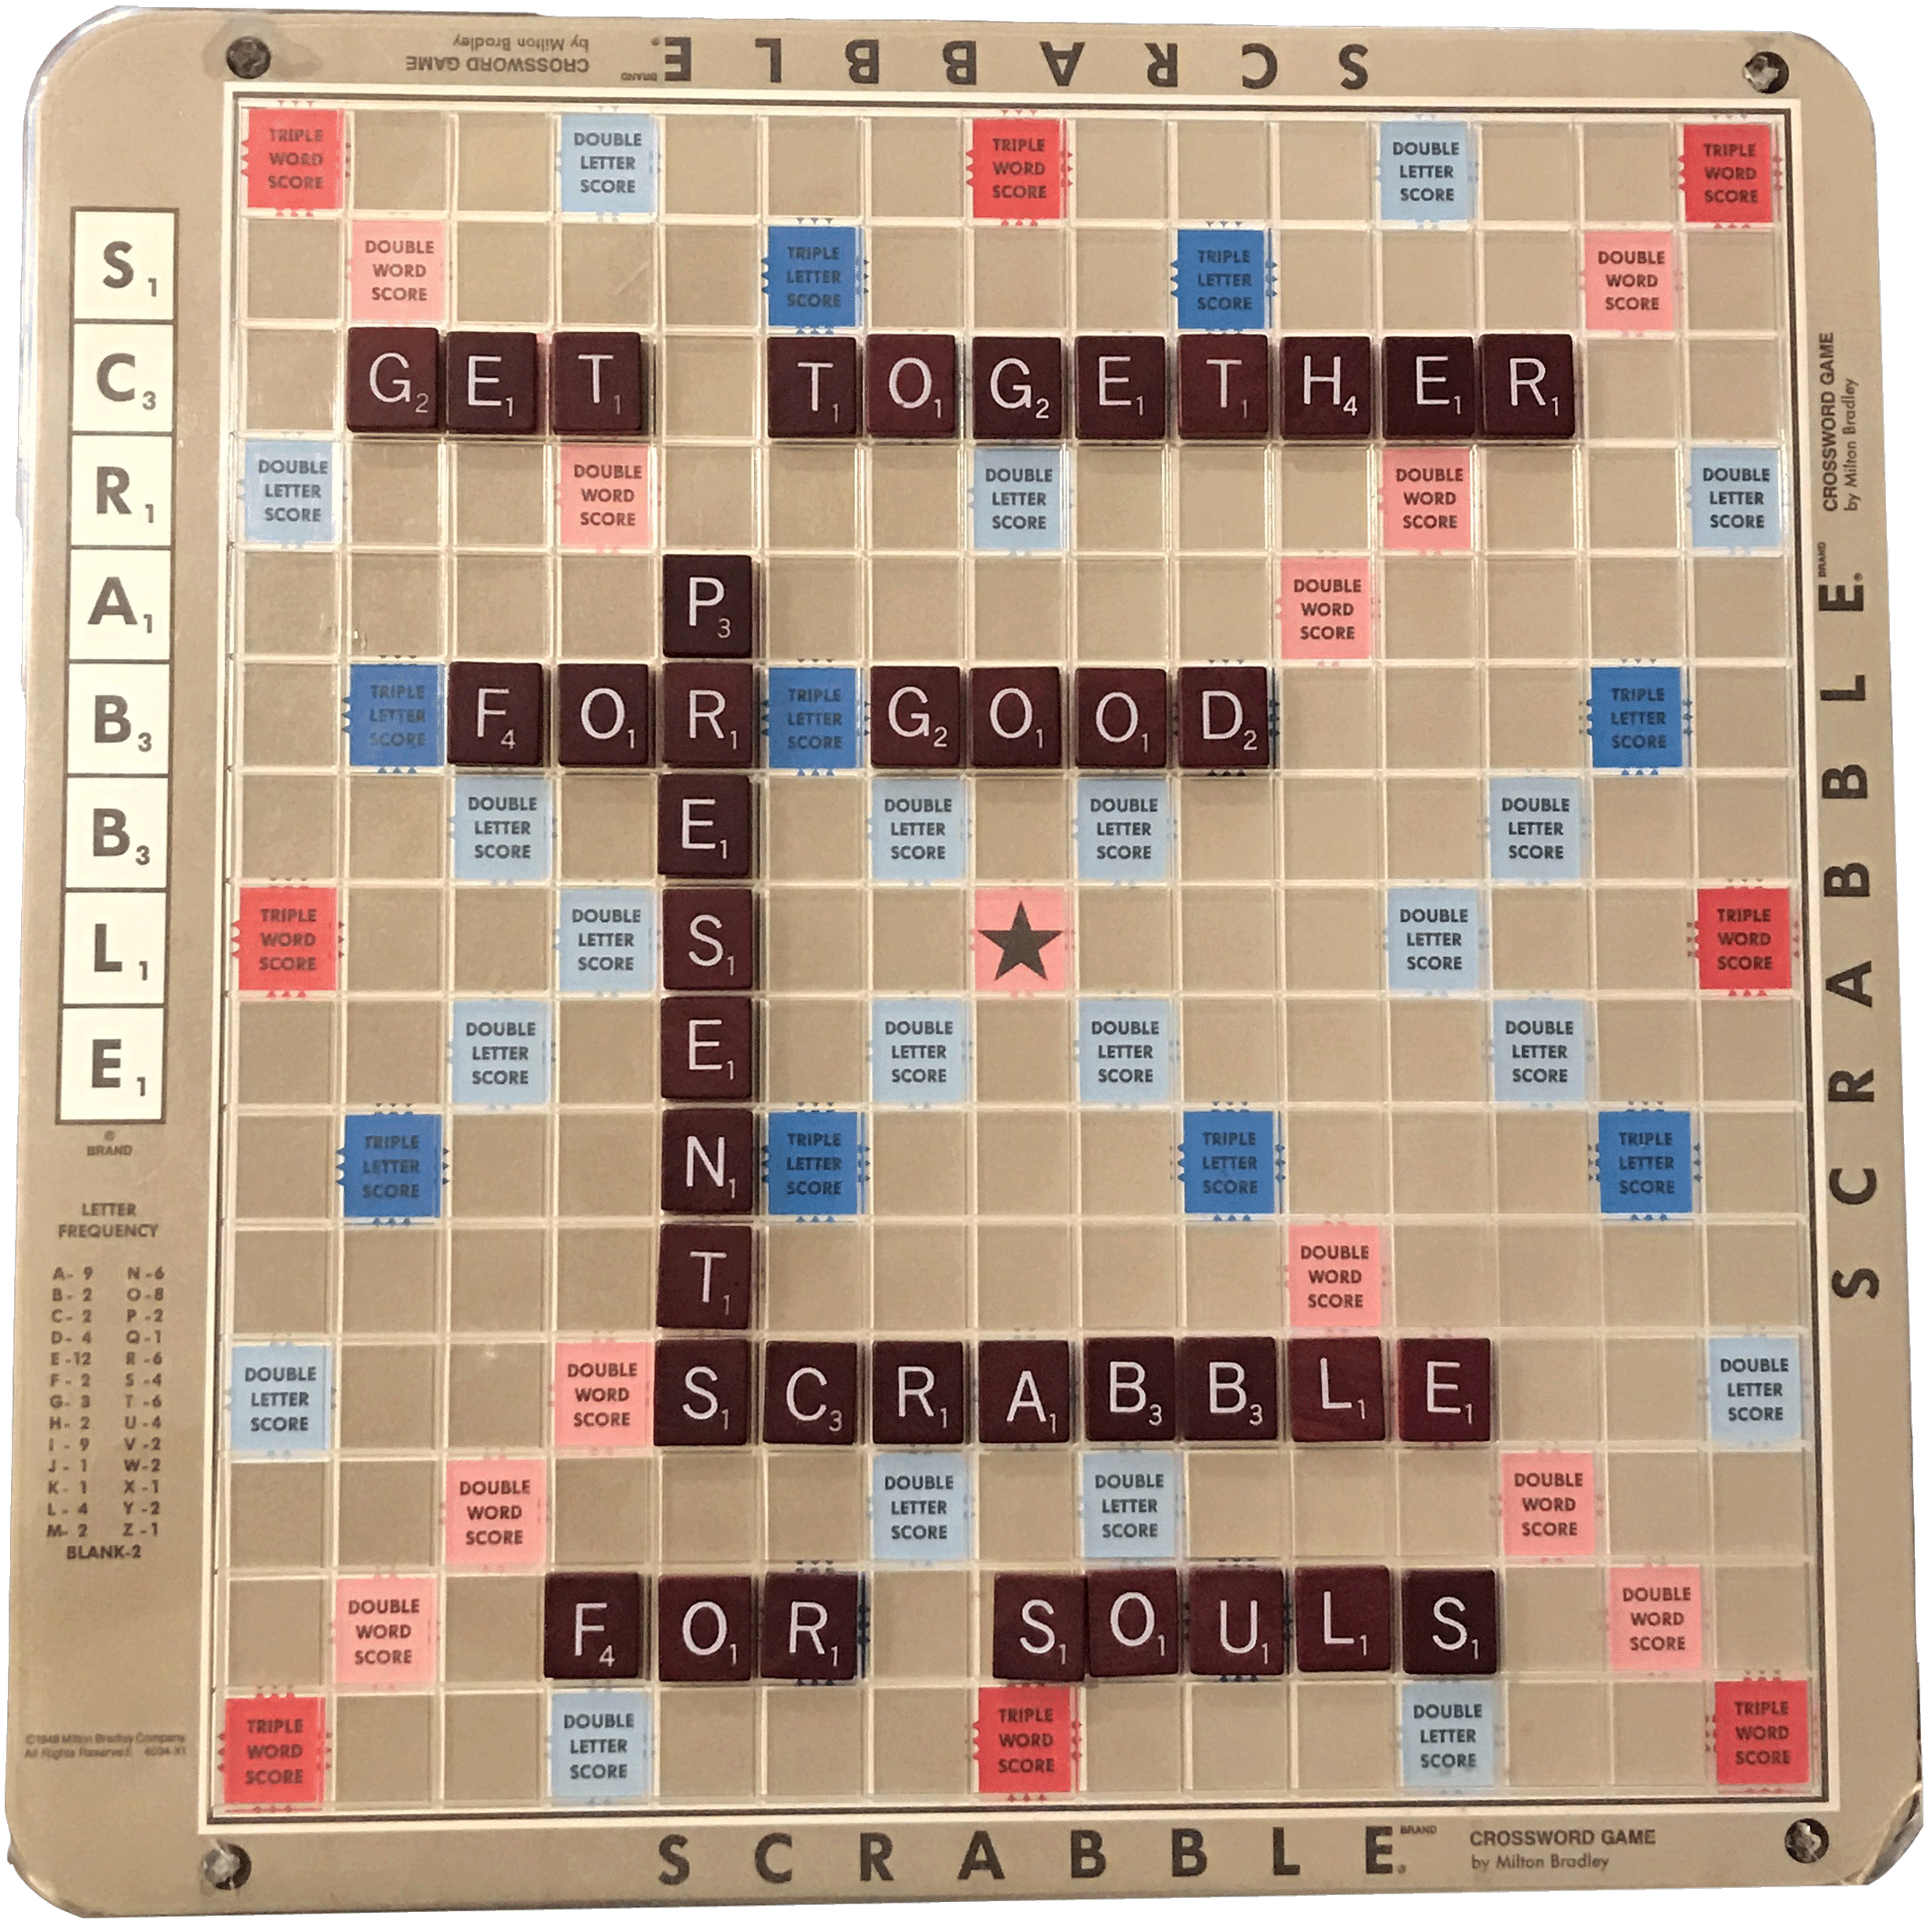 Get Together For Good Charity Fundraisers Scrabble for Souls 